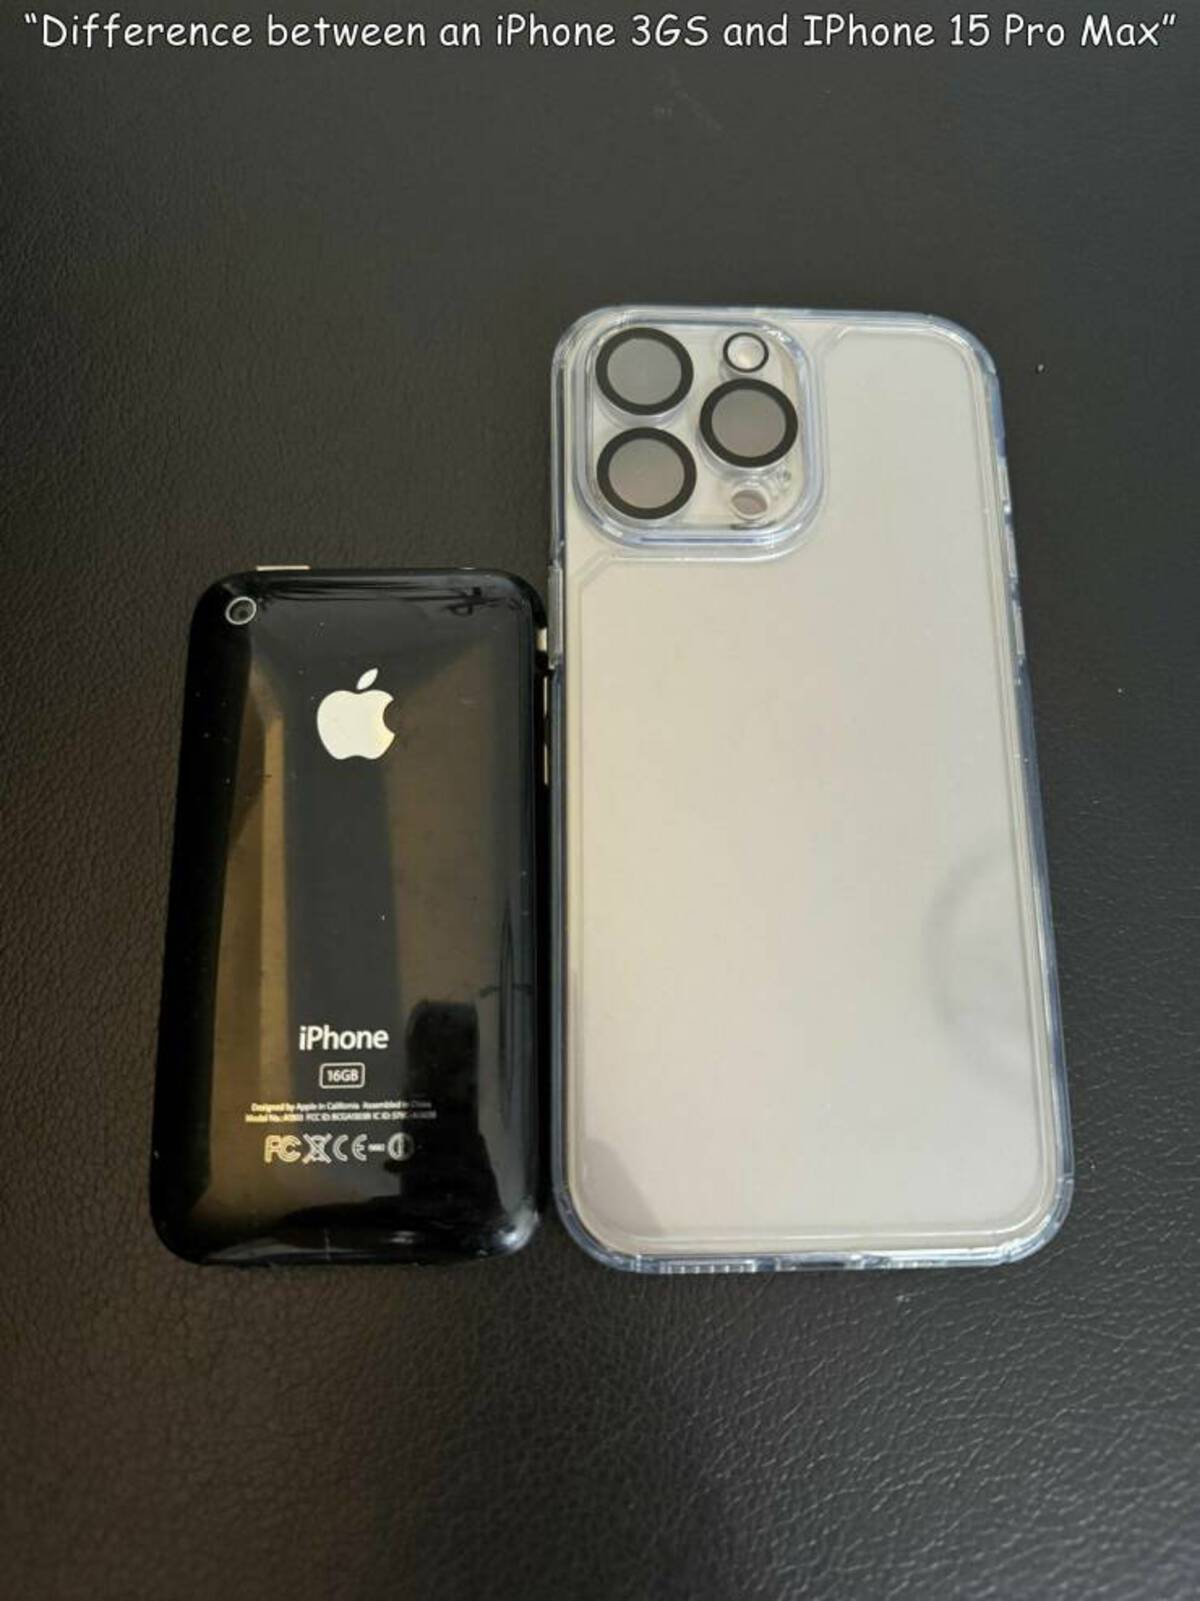 mobile phone - "Difference between an iPhone 3GS and IPhone 15 Pro Max" iPhone 16GB Doigned by Apple In Ca Fccosa Cosy PcxceO